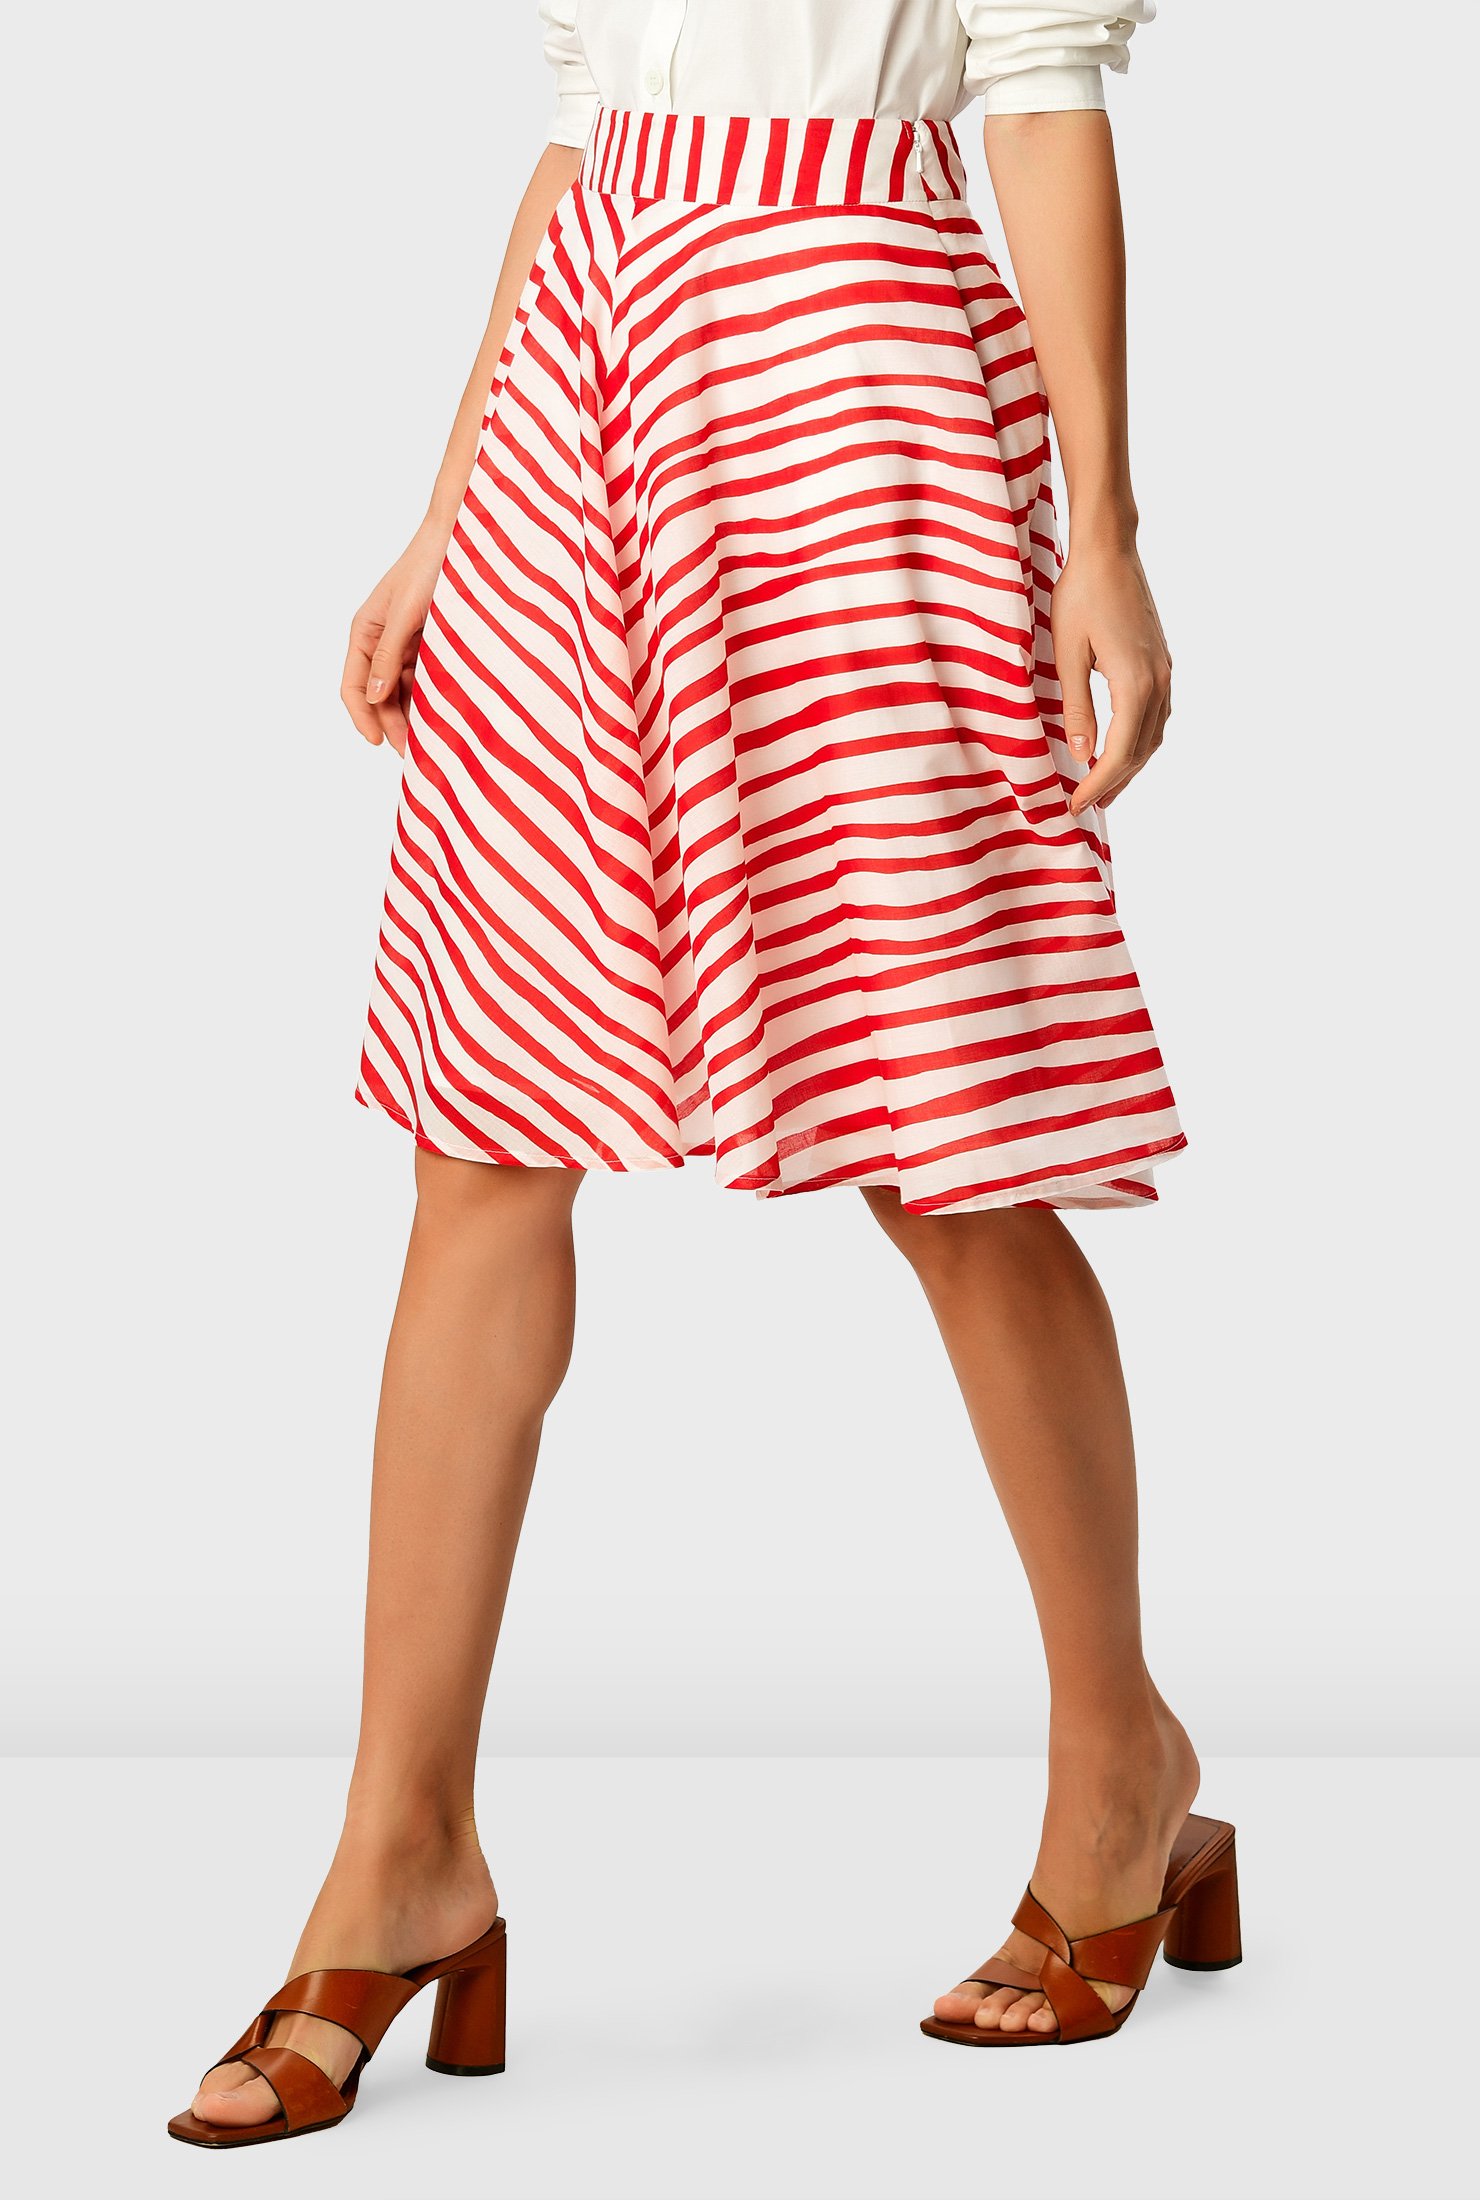 Fashion Skirts Flounce Skirts Edited Flounce Skirt white-red striped pattern casual look 